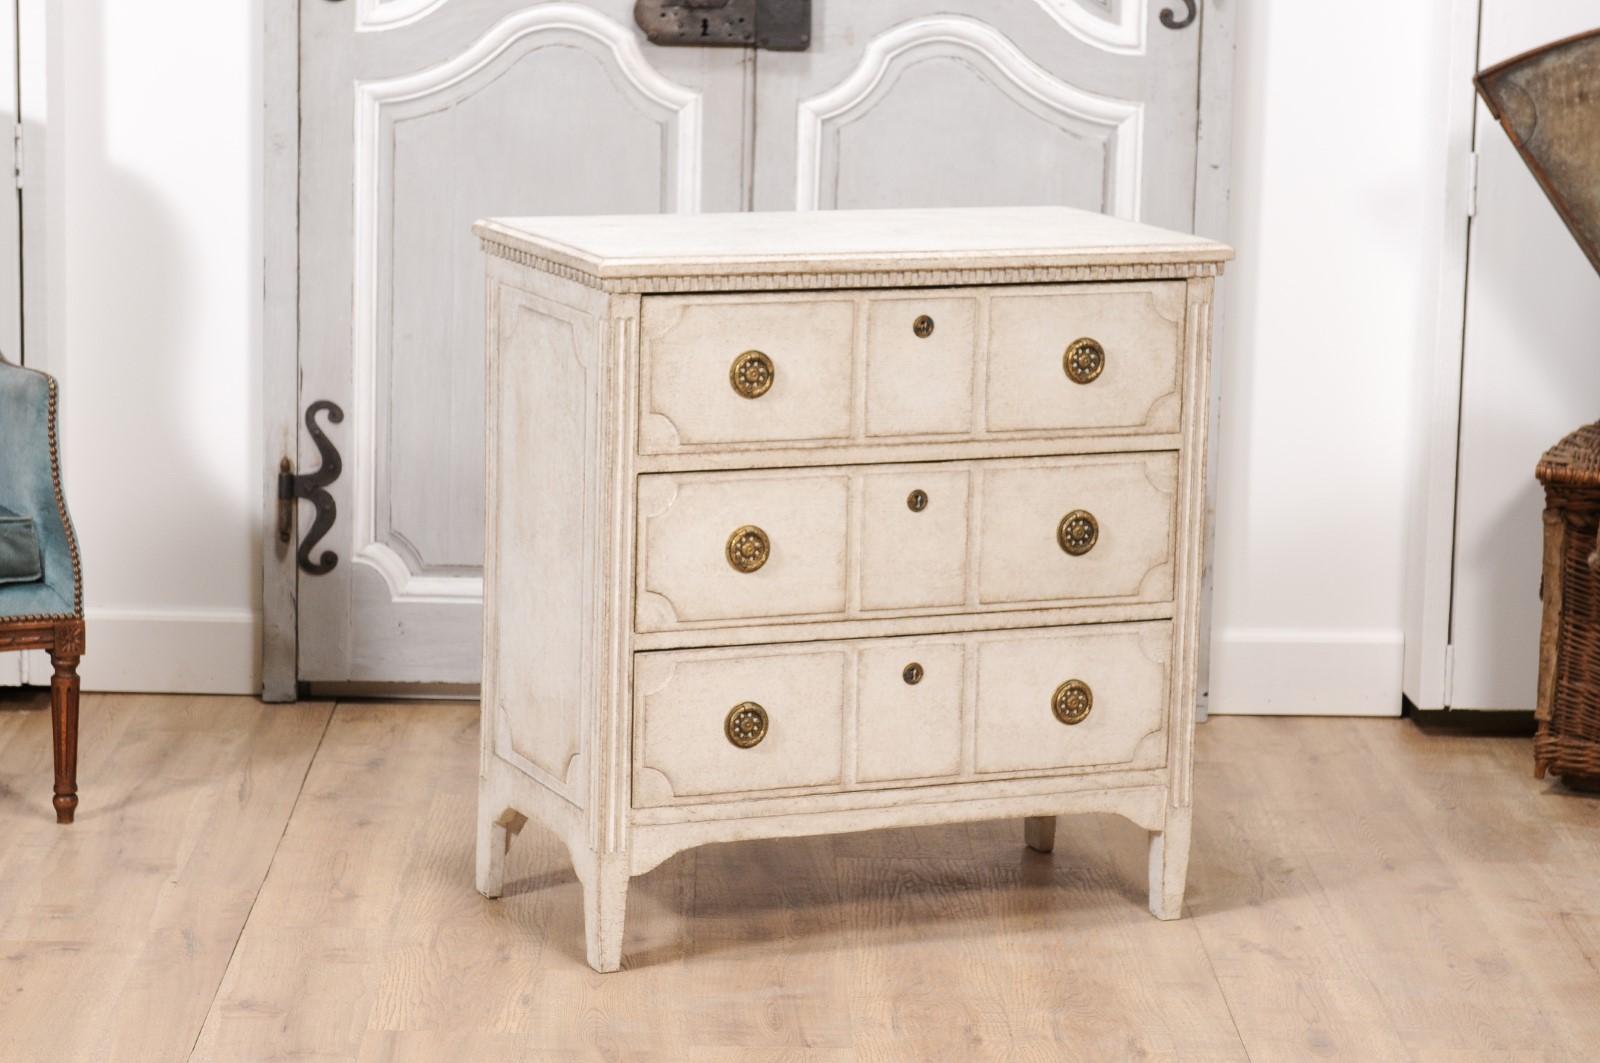 A Scandinavian Neoclassical style painted chest from the 19th century with three drawers, carved décor and brass hardware. This 19th-century Scandinavian Neoclassical style painted chest exudes understated elegance, harmoniously blending